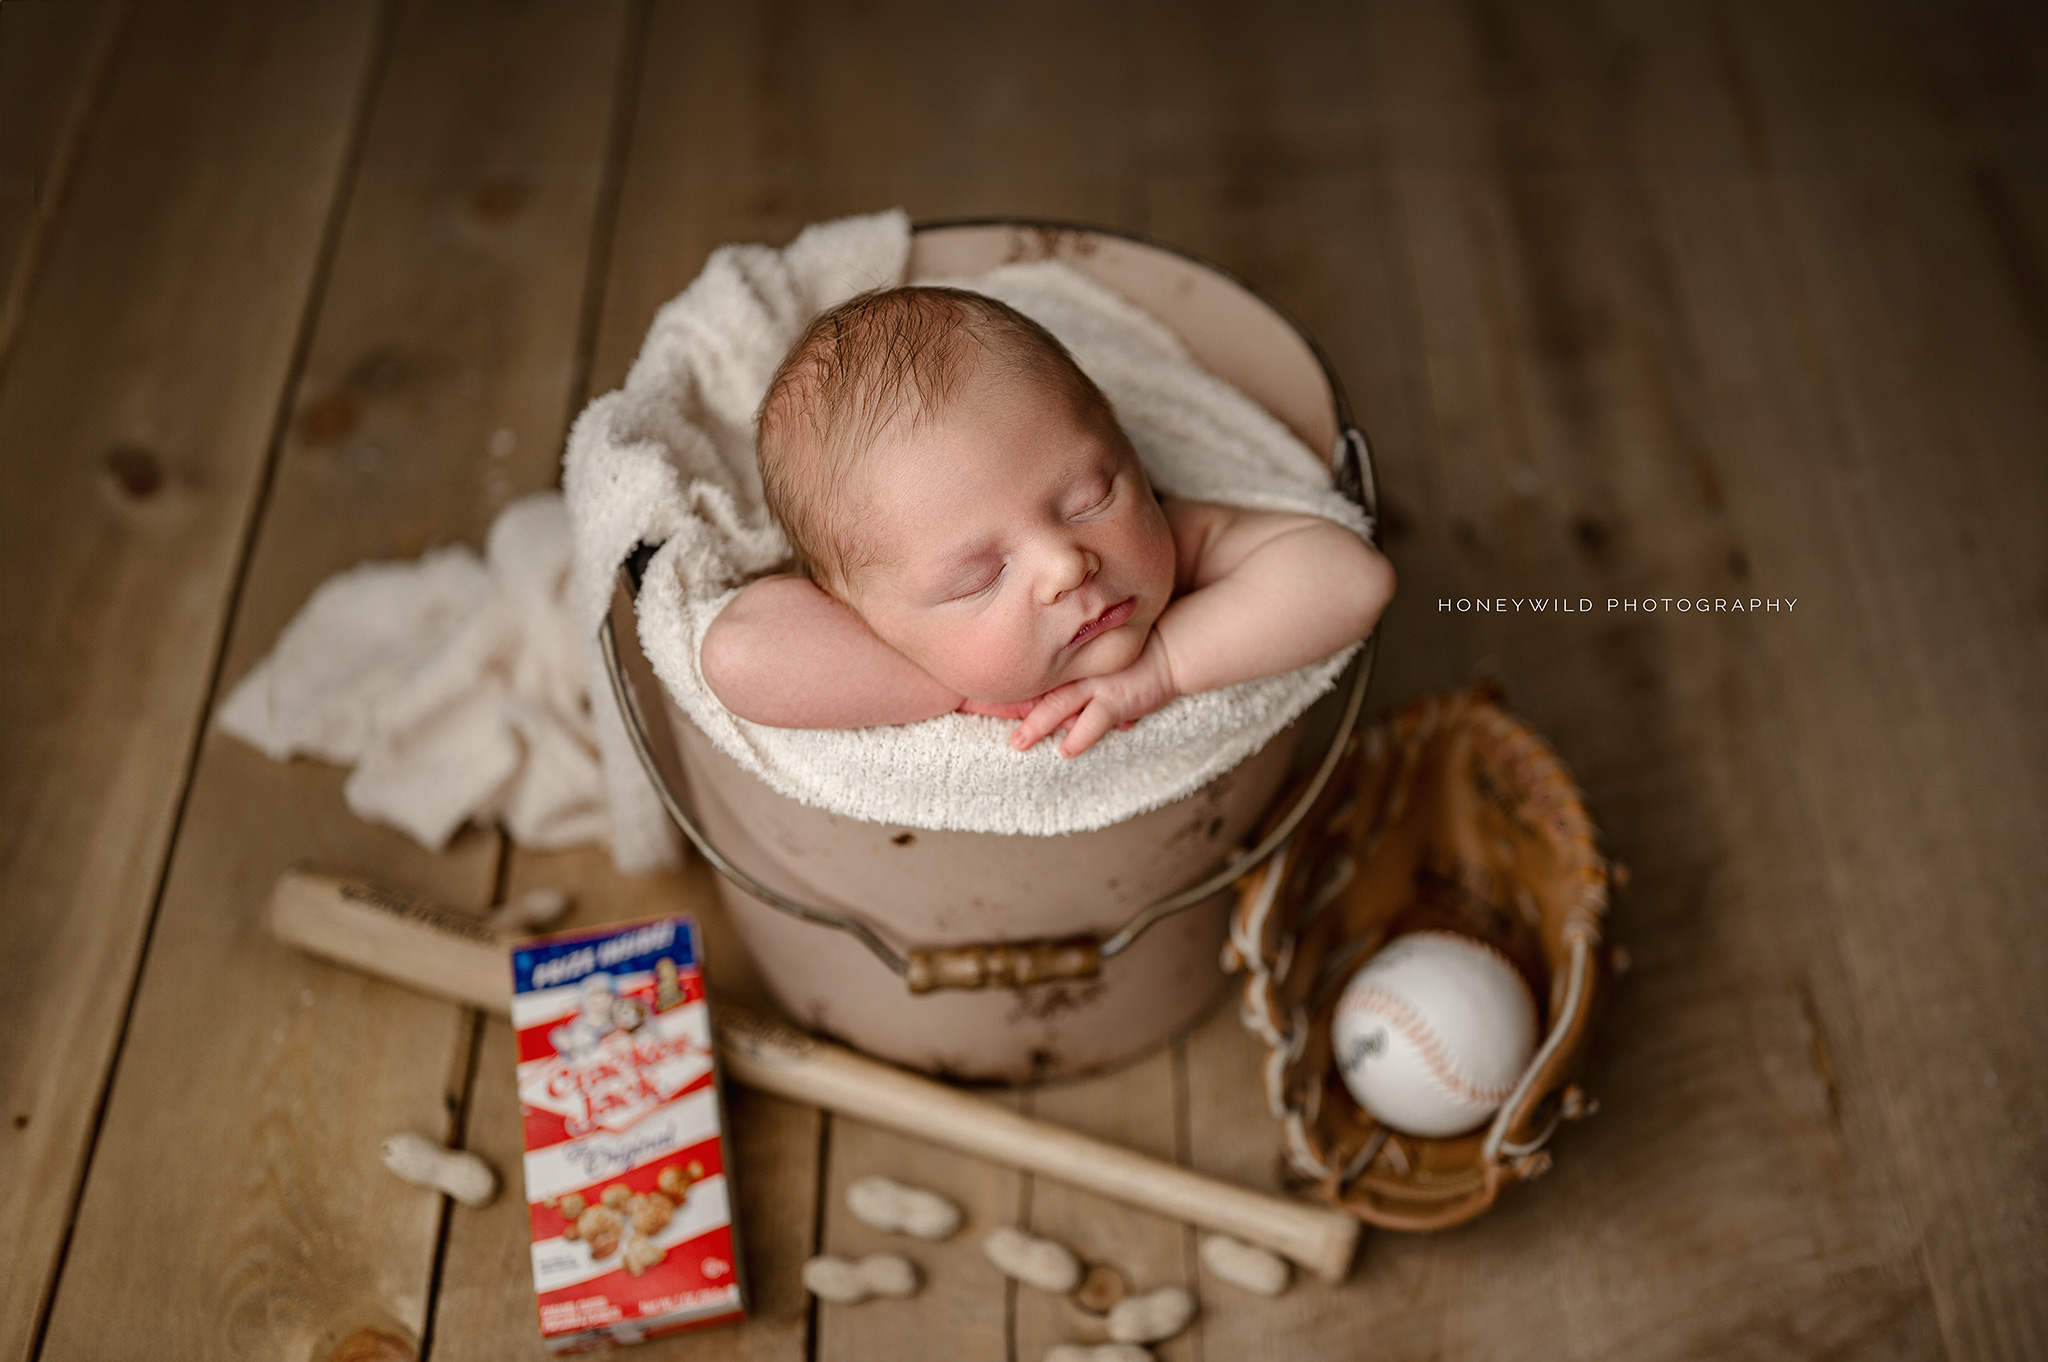 Take me out to the ball game; newborn baby ready for his first baseball game.